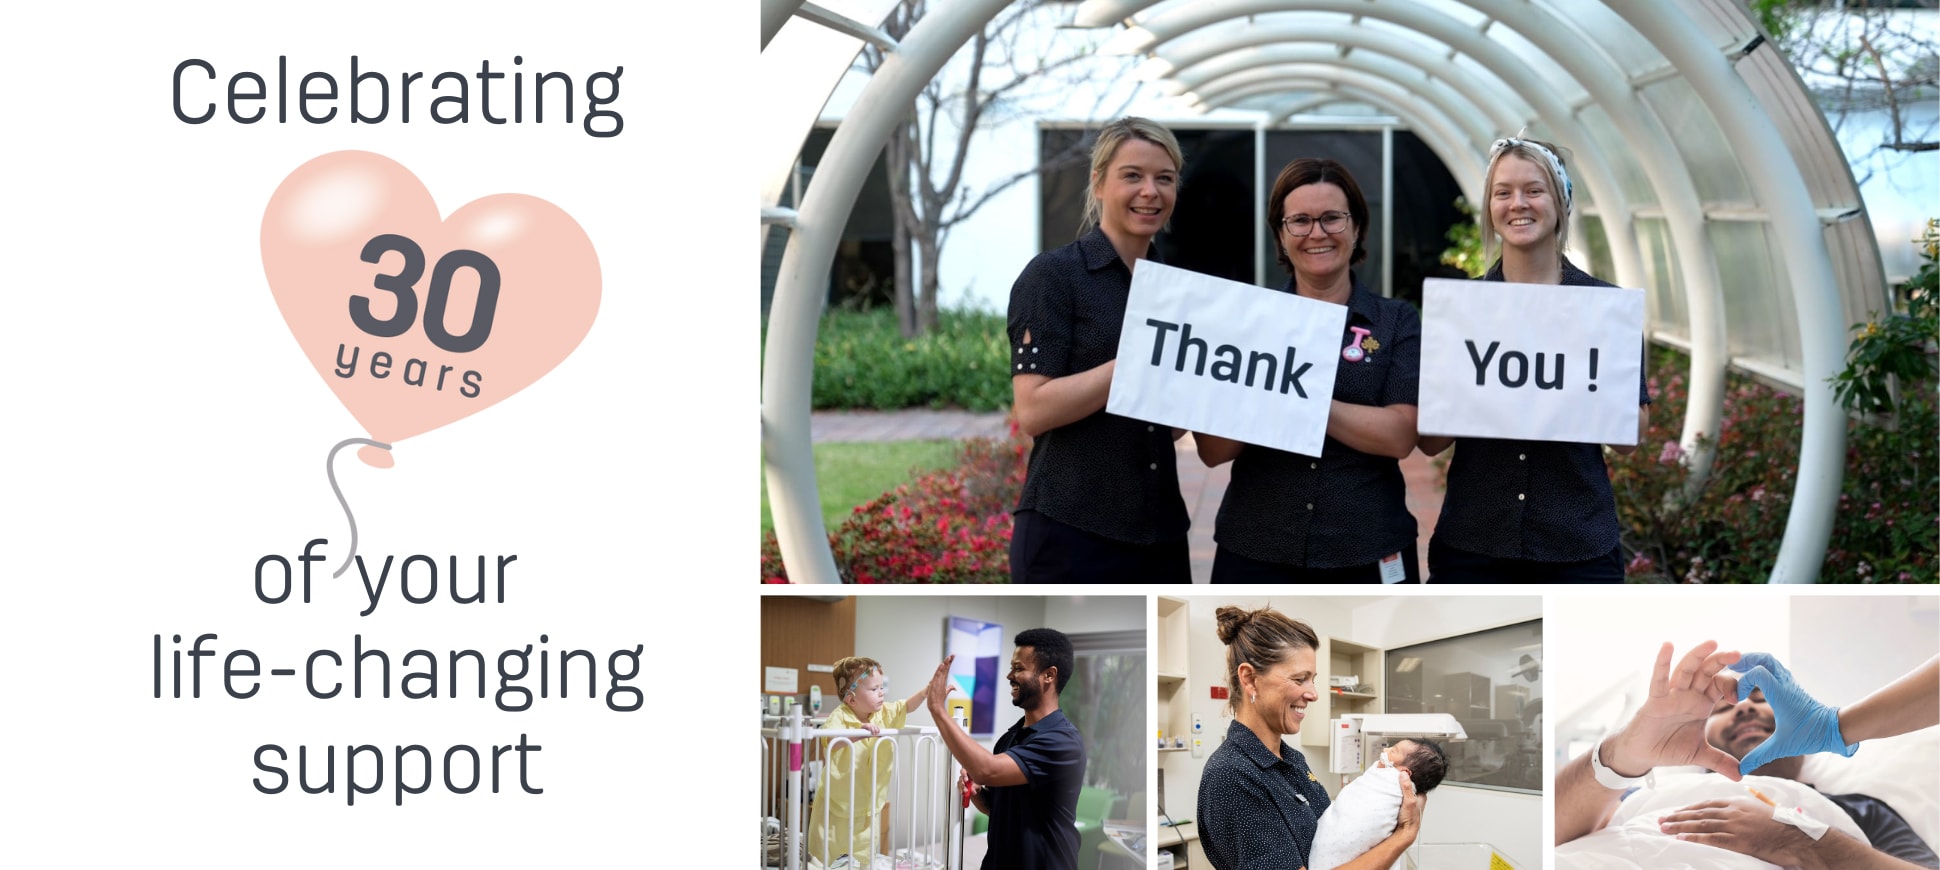 Photo collage showing (top) caregivers holding up a thank you sign, (bottom left) a sick boy in a hospital crib high fives a male caregiver, (bottom centre) a smiling caregiver holds a new born baby with a nose tube, (bottom right) a hospital patient and caregiver hold up their fingers to create a heart shape